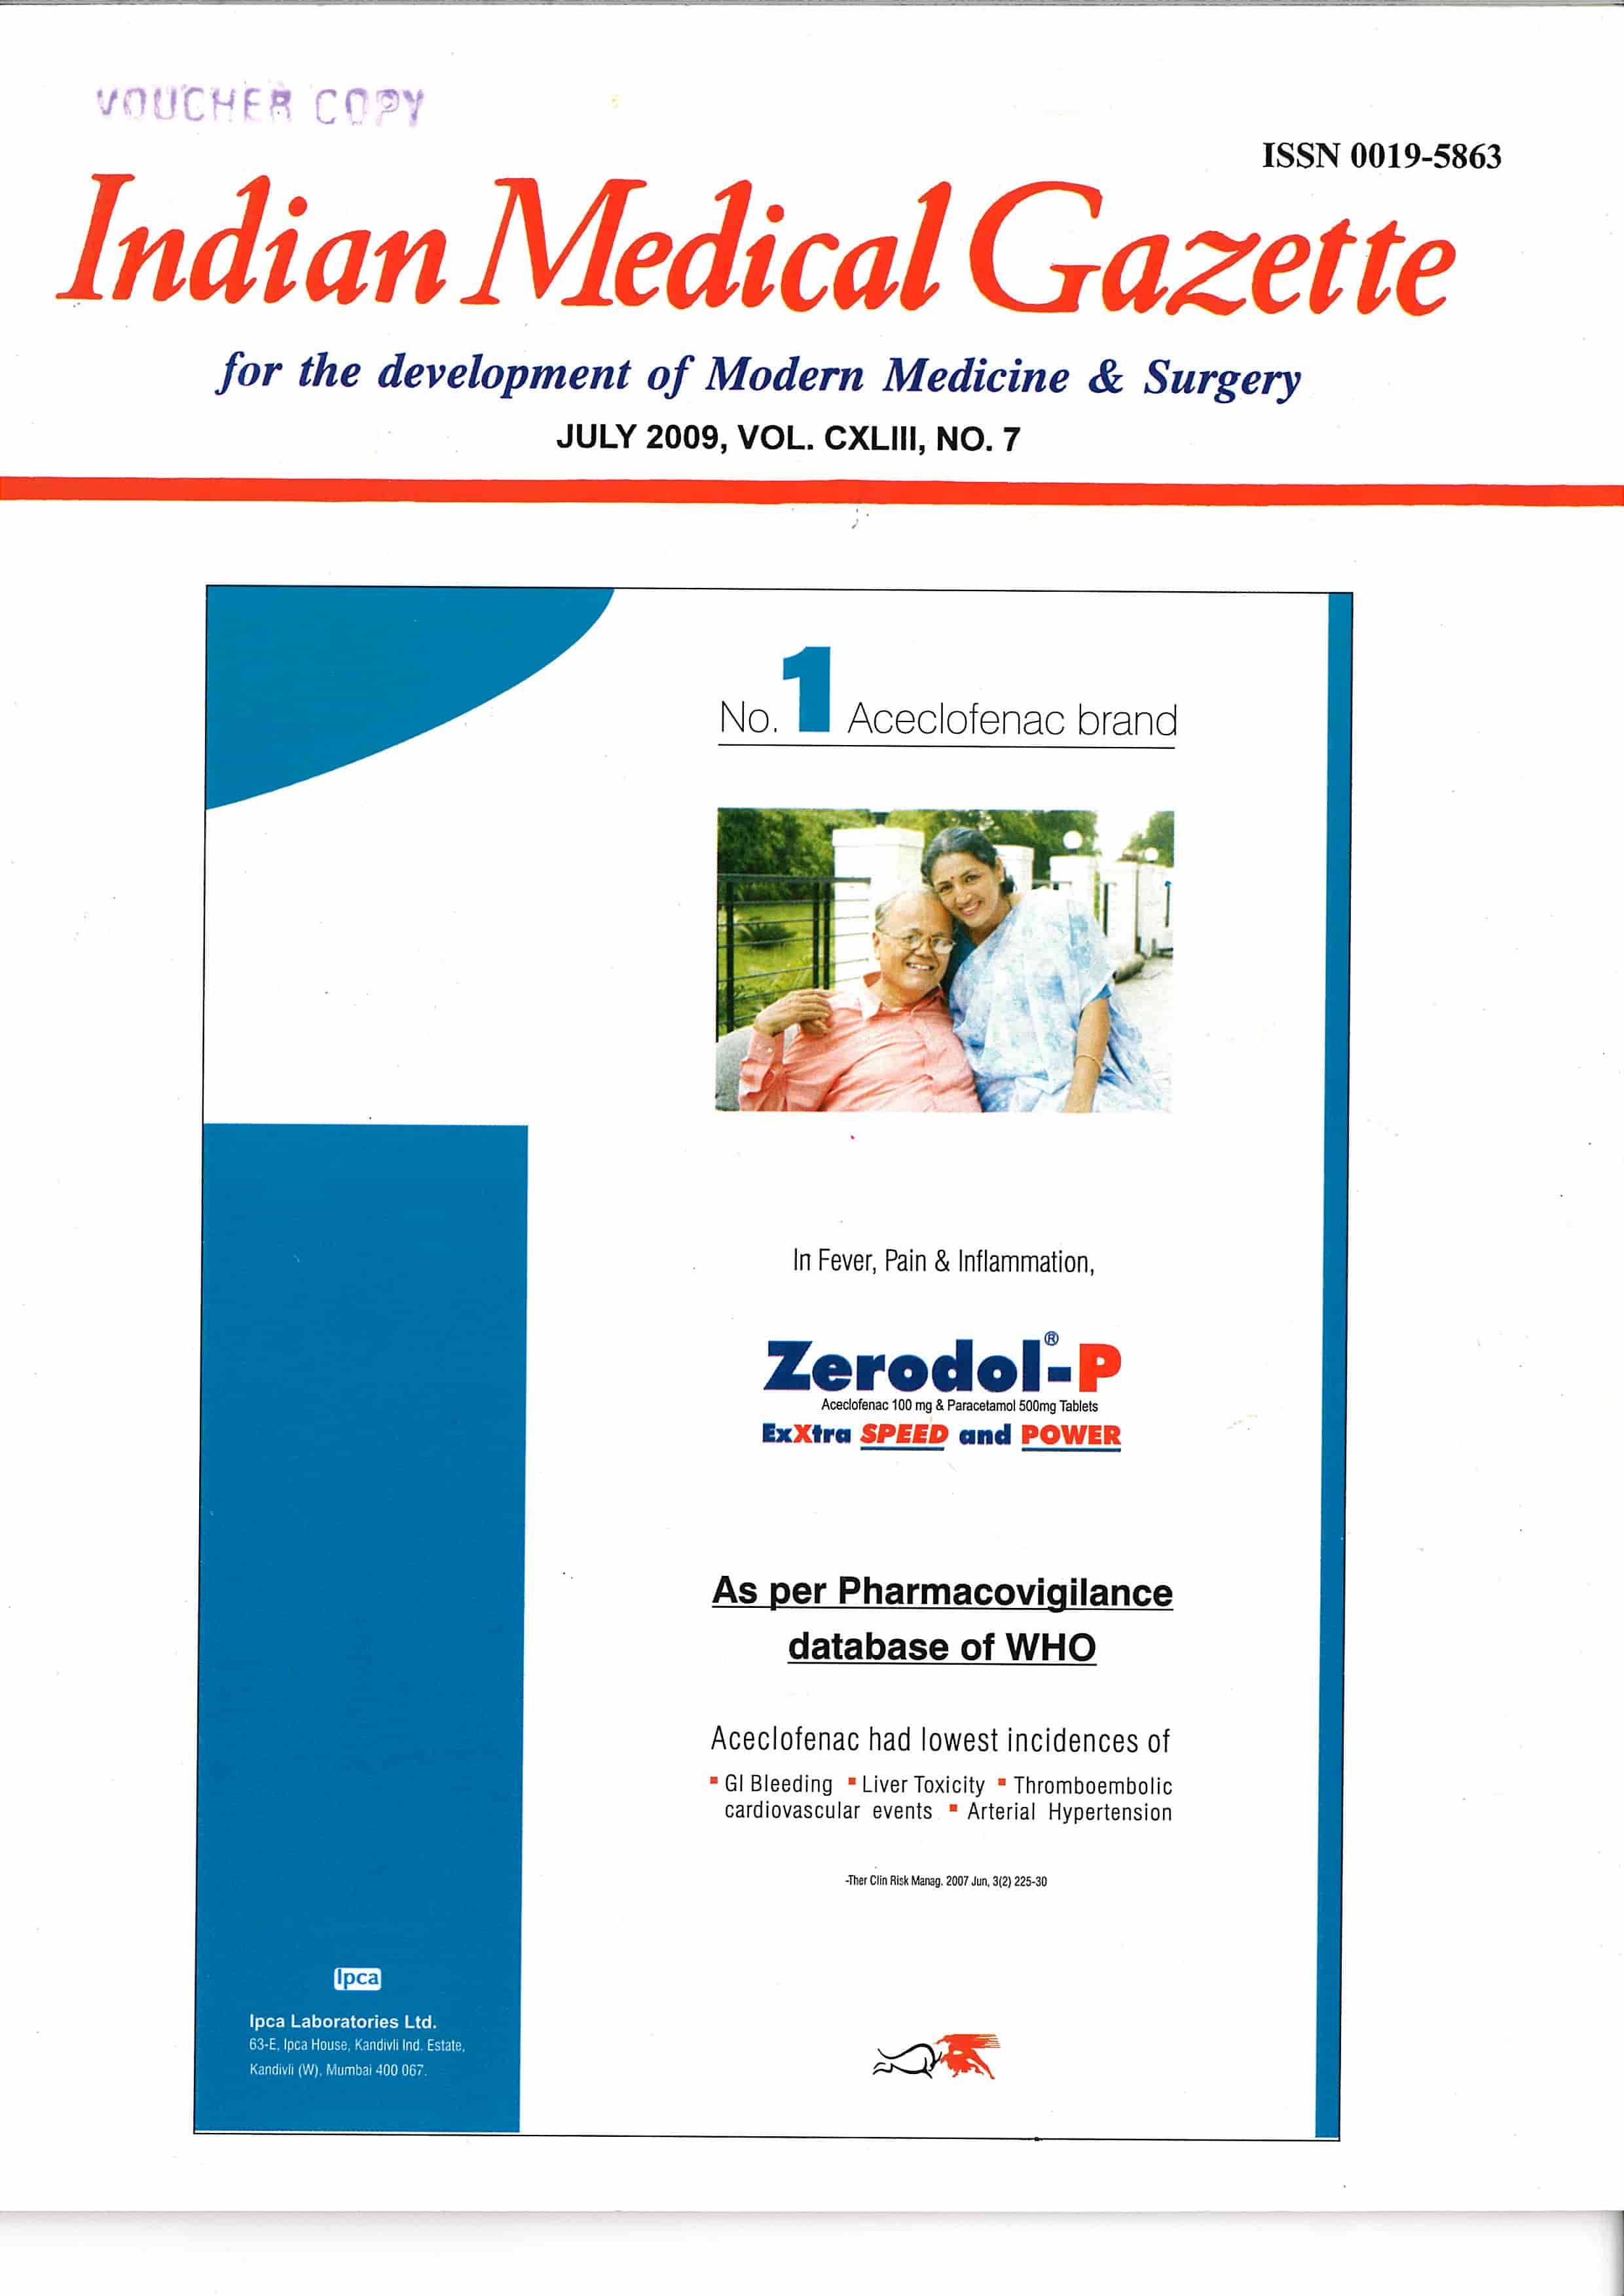 Evaluation of The Efficacy and Safety of Zostum (Combination of Cefoperazone and Sulbactam) followed by Zostum-O (Cefditoren) in Prevention of Surgical Infections 